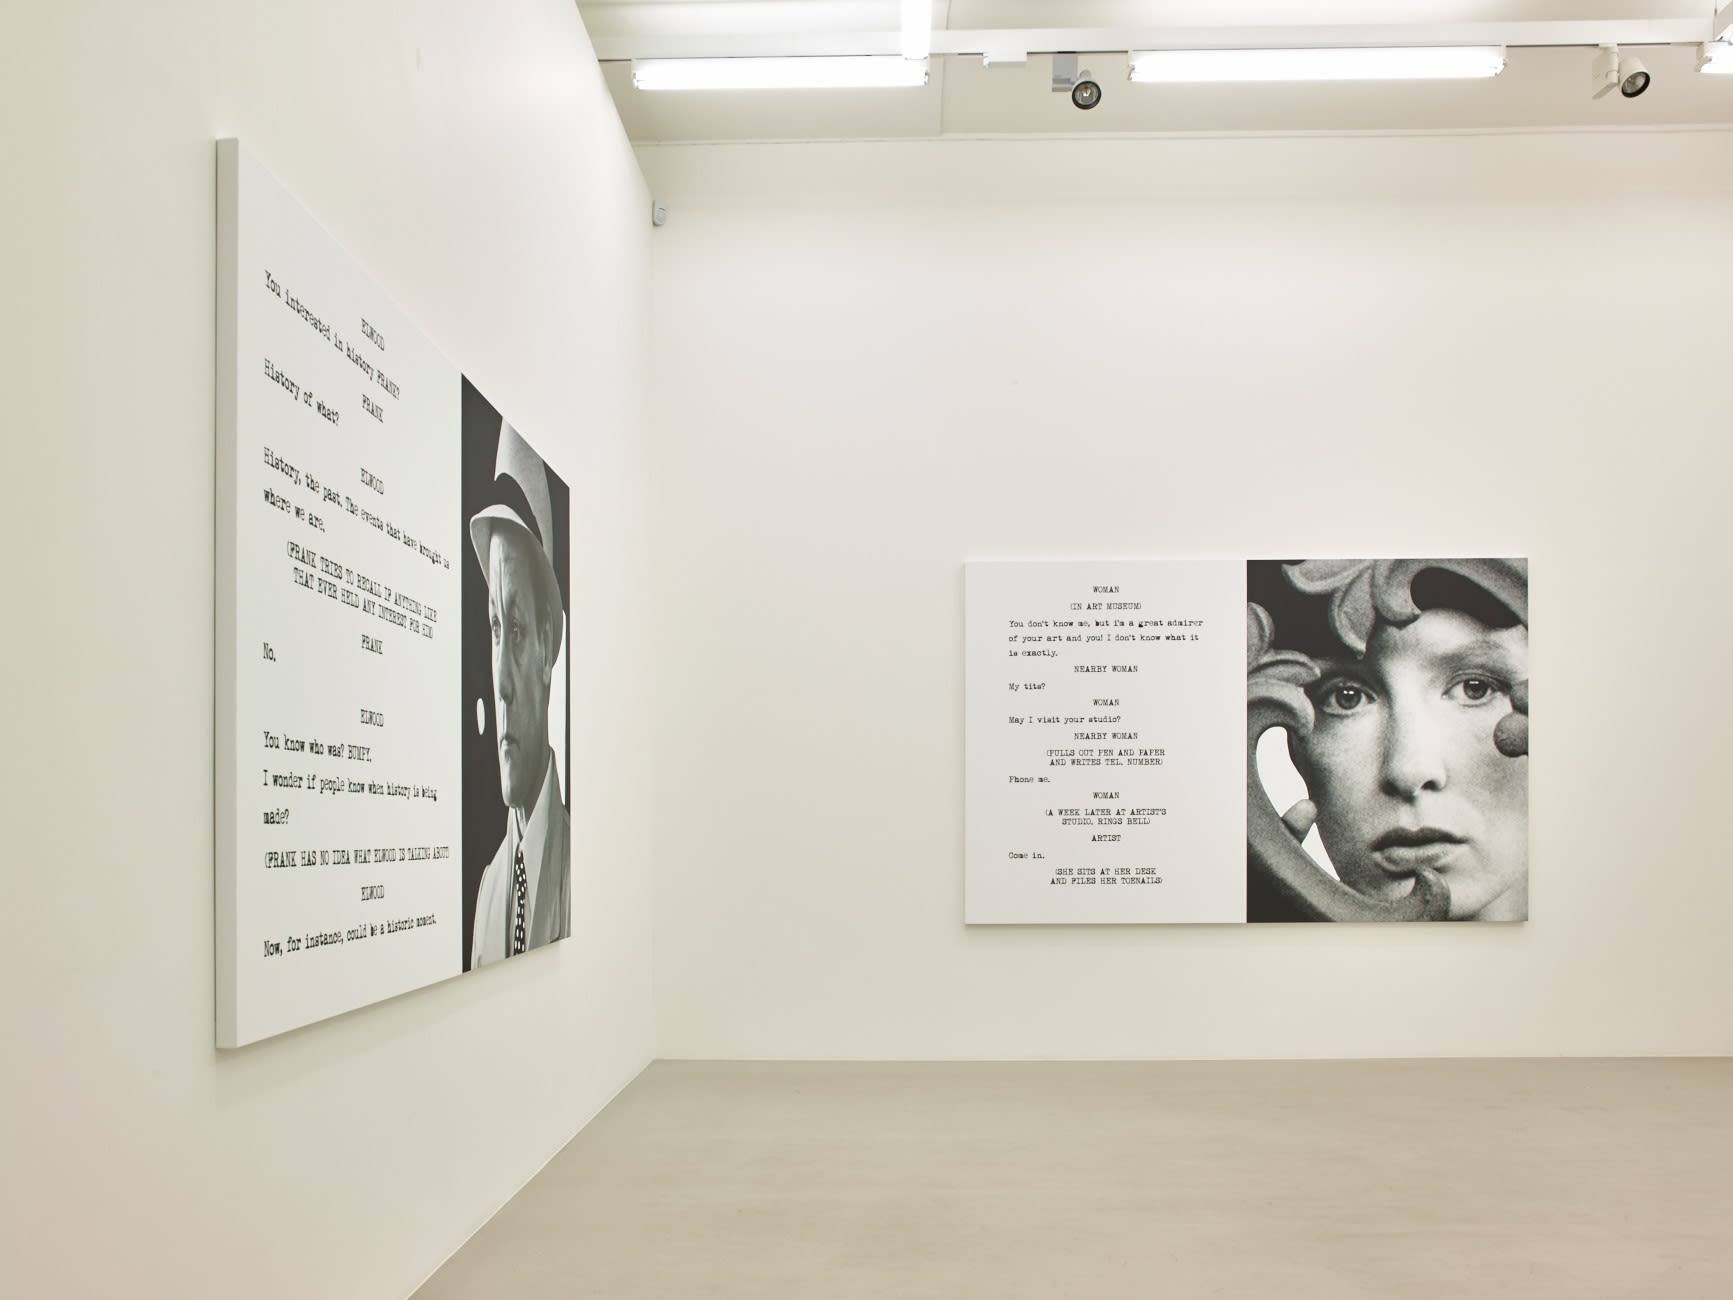 In a large white space with columns and a long skylight, 2 large paintings hang. Each are roughly half image and half text, which is in the format of a film script.